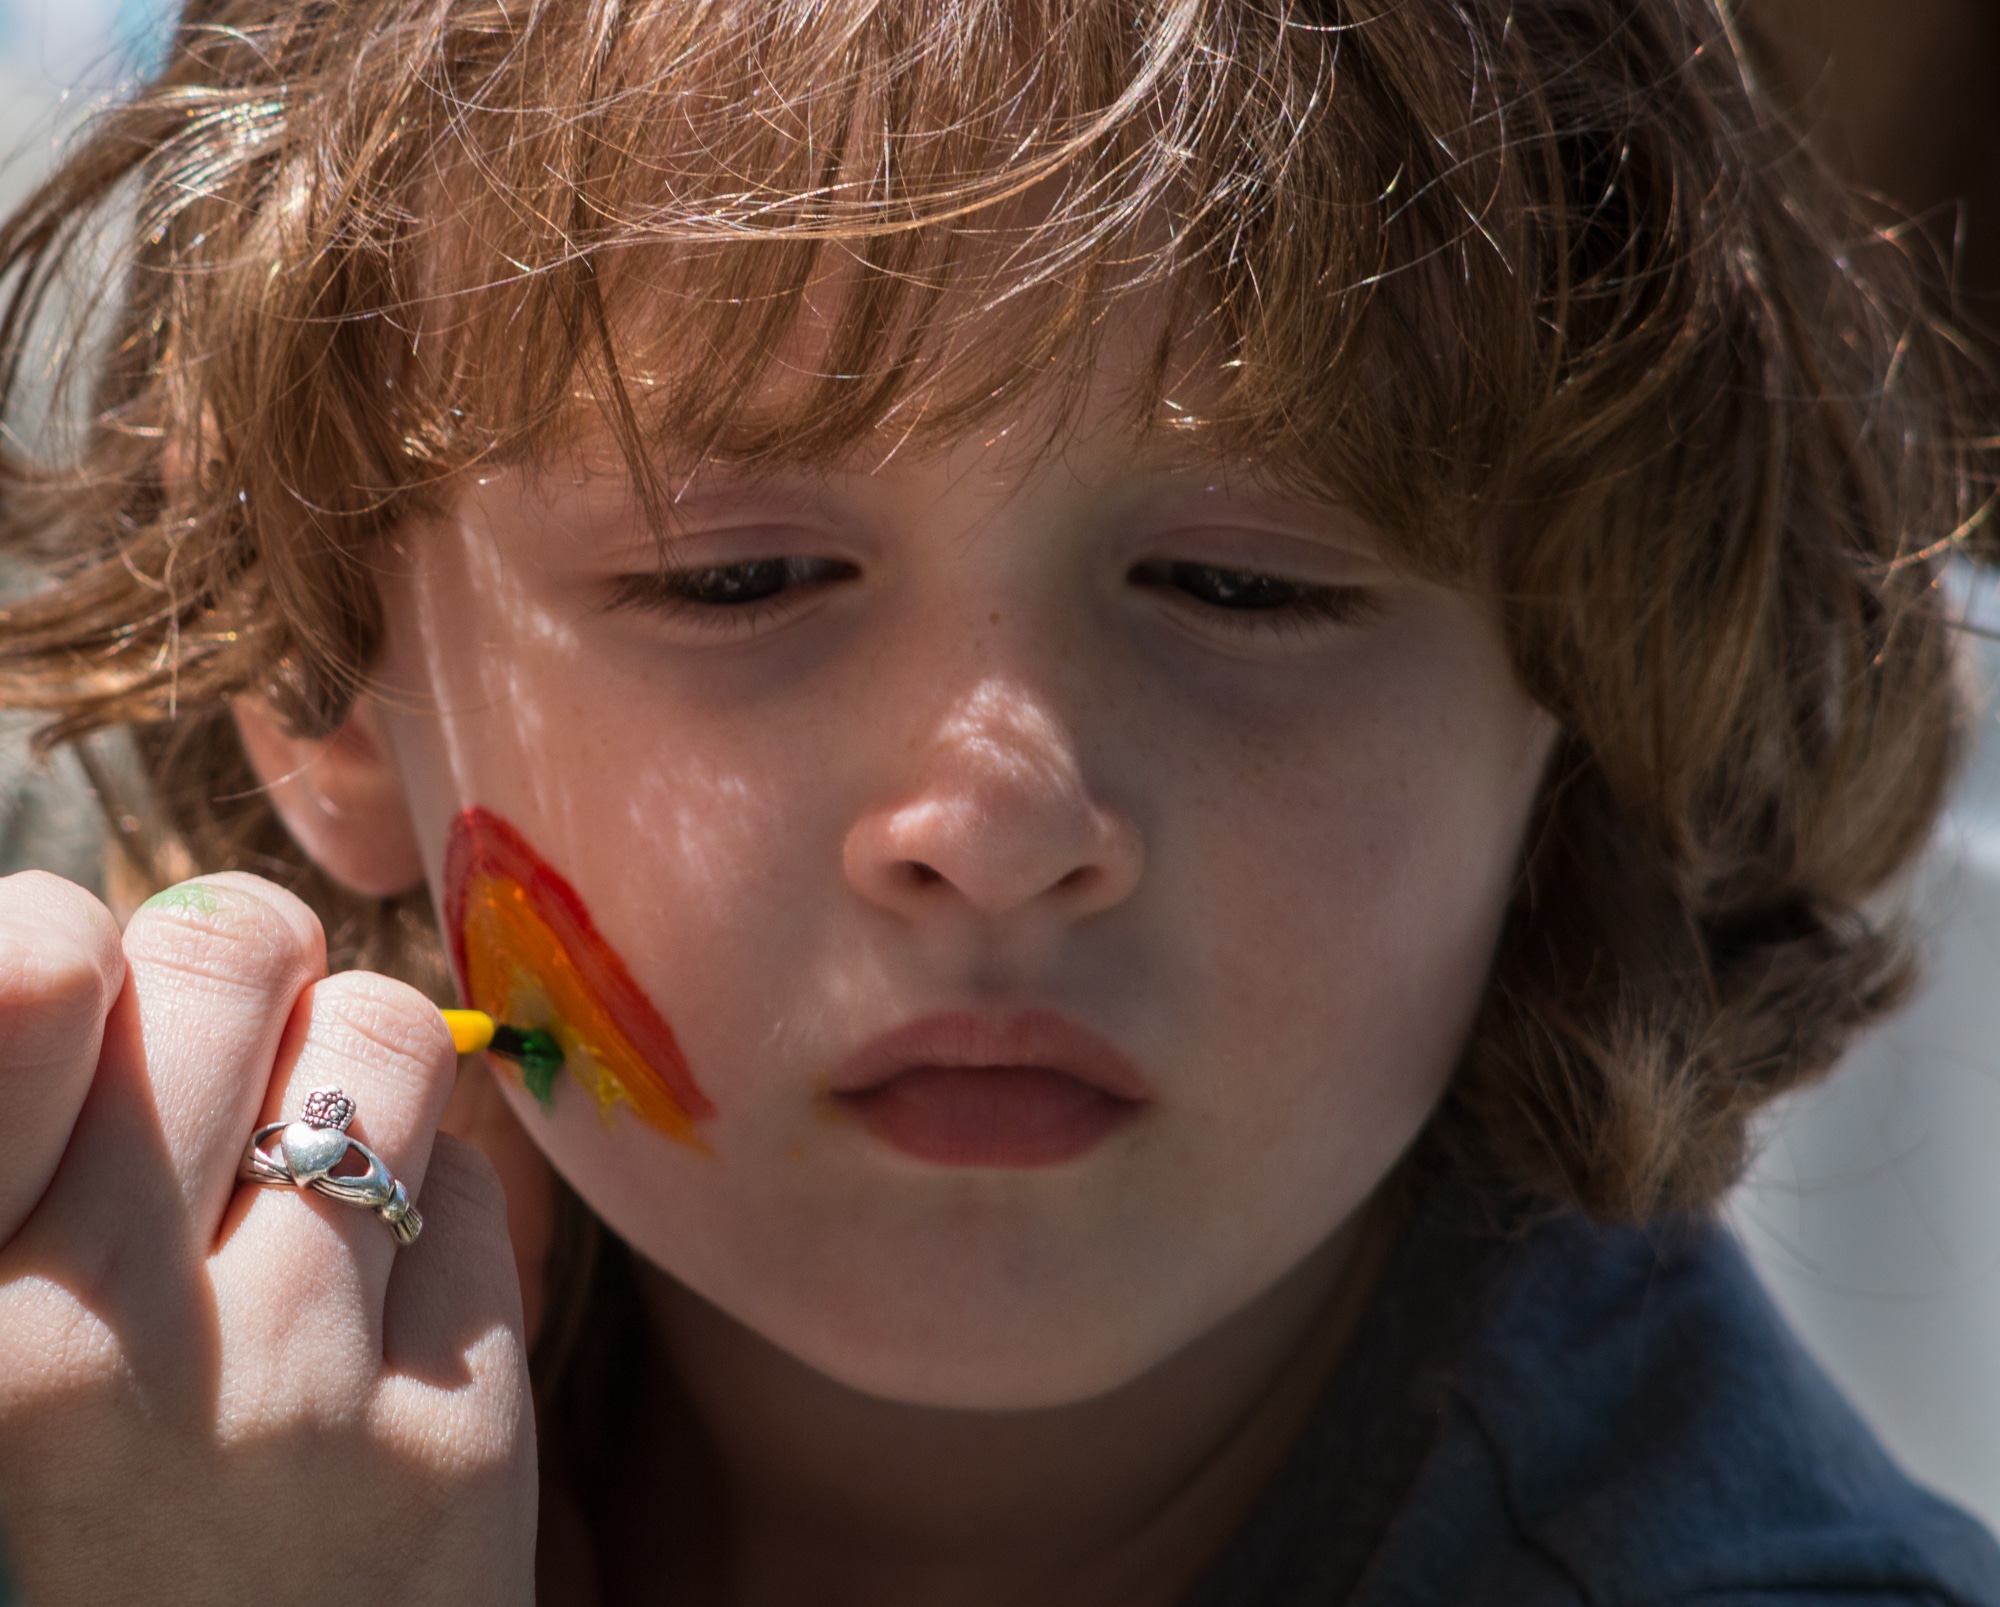 alt=Photo of a young child getting a rainbow painted on their face